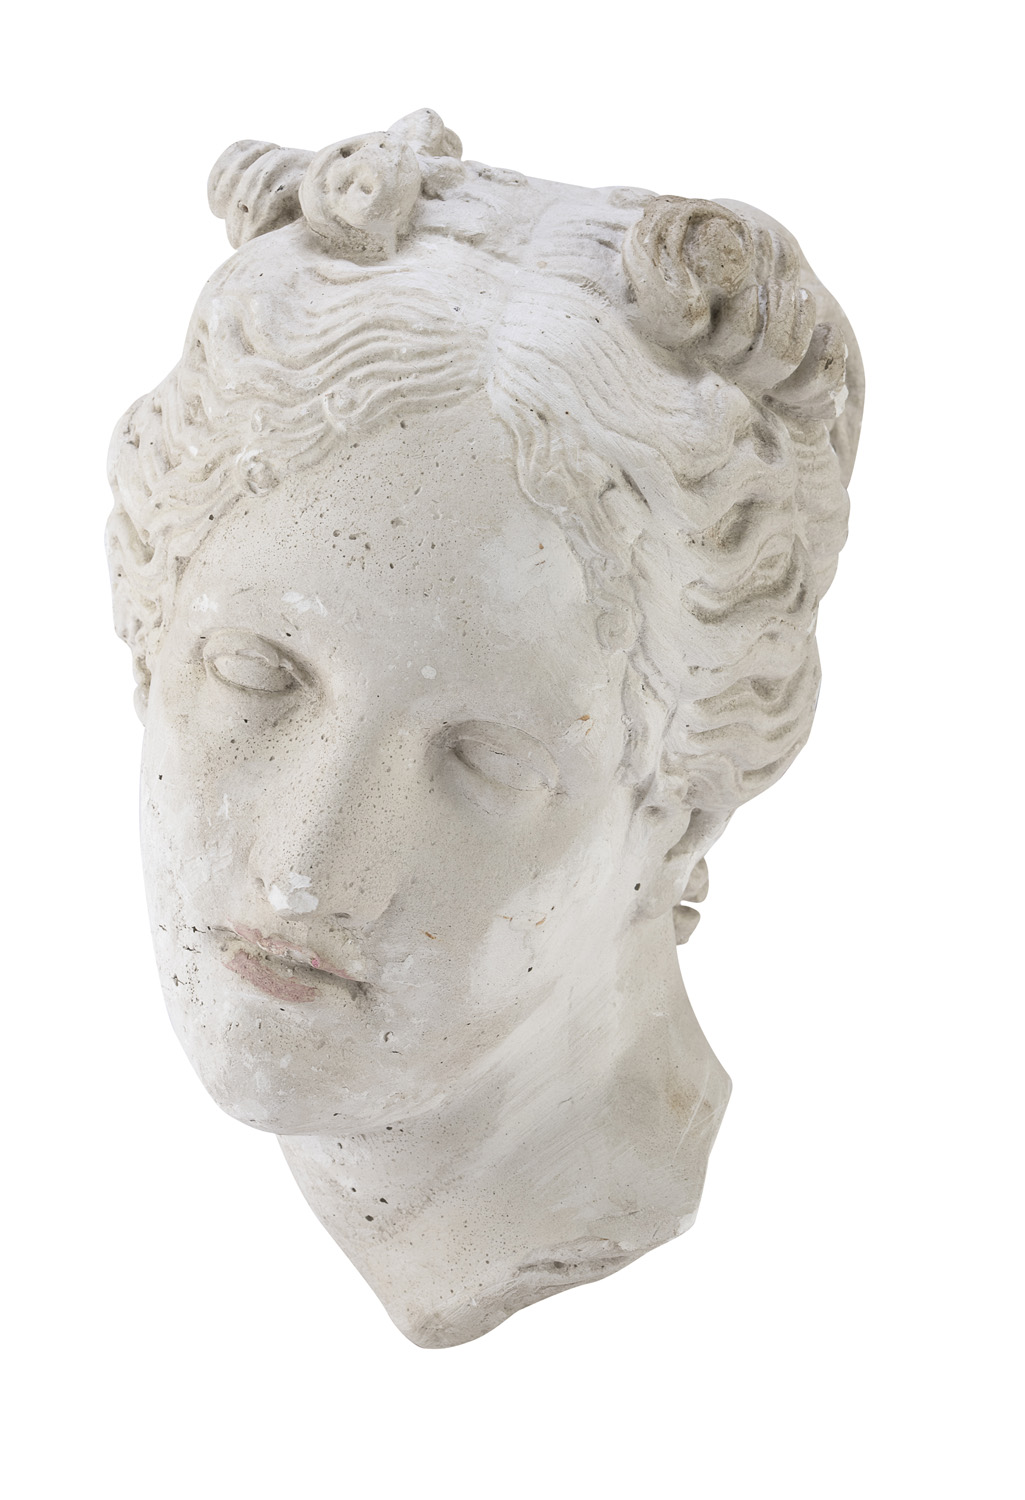 HEAD IN PLASTER EARLY 20TH CENTURY